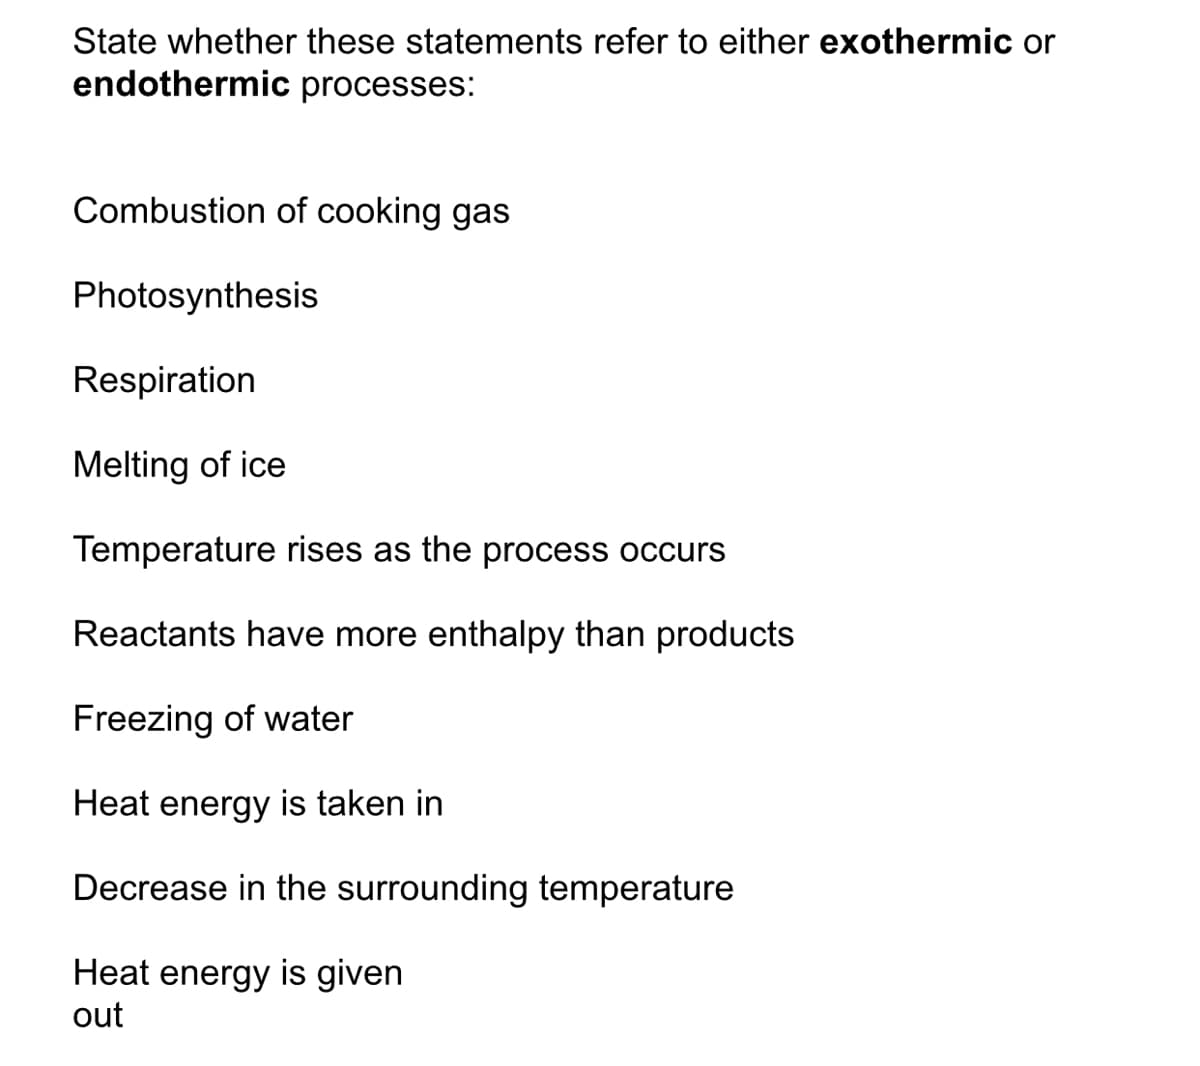 State whether these statements refer to either exothermic or
endothermic processes:
Combustion of cooking gas
Photosynthesis
Respiration
Melting of ice
Temperature rises as the process occurs
Reactants have more enthalpy than products
Freezing of water
Heat energy is taken in
Decrease in the surrounding temperature
Heat energy is given
out
